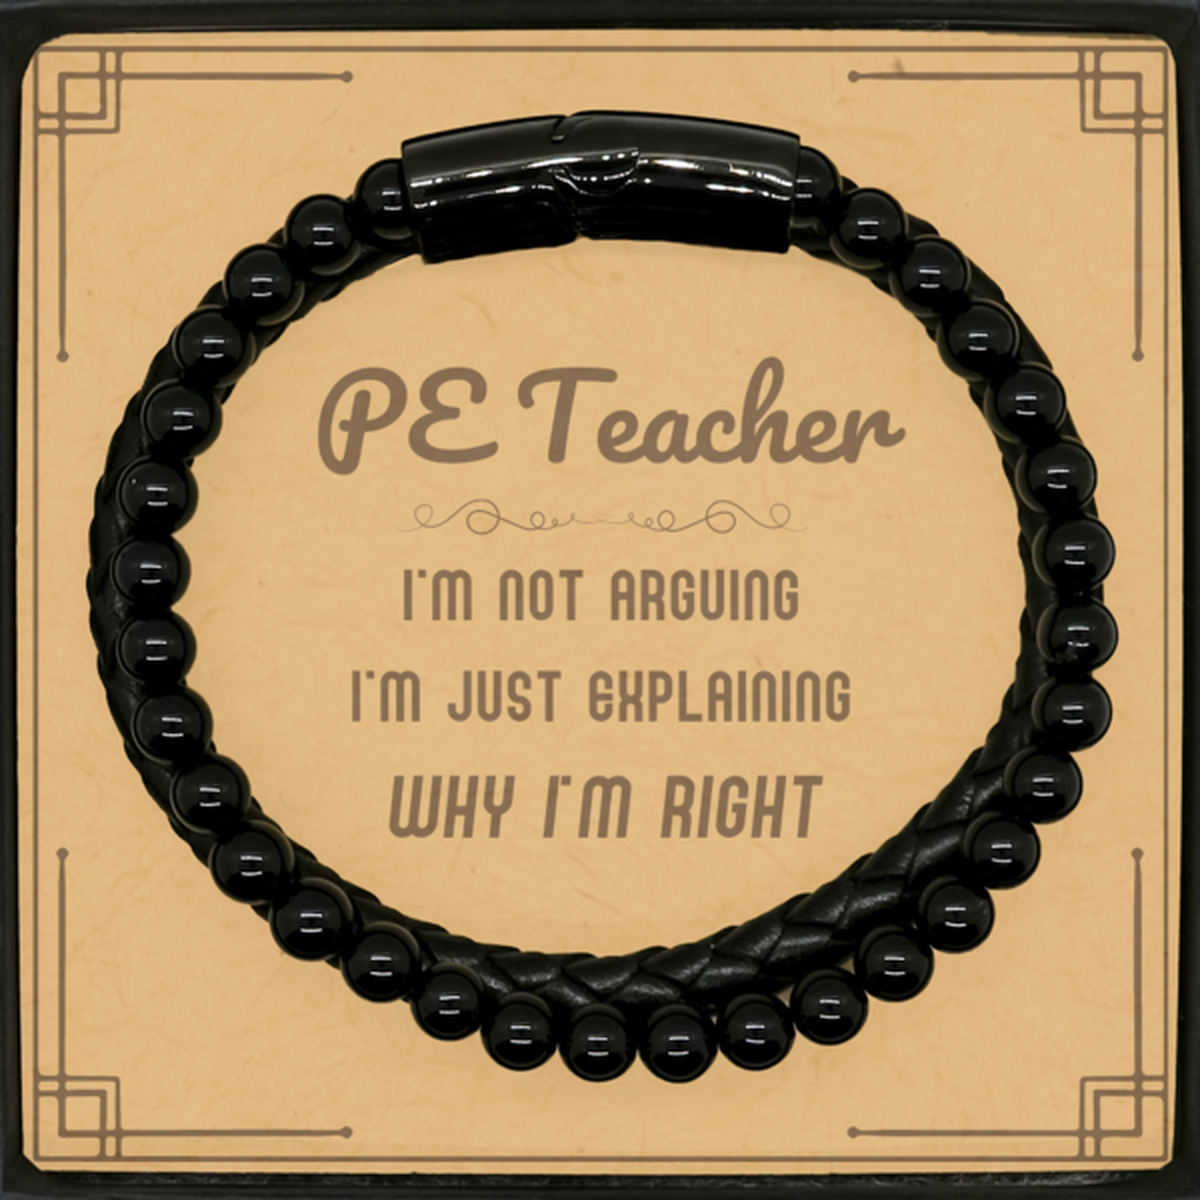 PE Teacher I'm not Arguing. I'm Just Explaining Why I'm RIGHT Stone Leather Bracelets, Funny Saying Quote PE Teacher Gifts For PE Teacher Message Card Graduation Birthday Christmas Gifts for Men Women Coworker